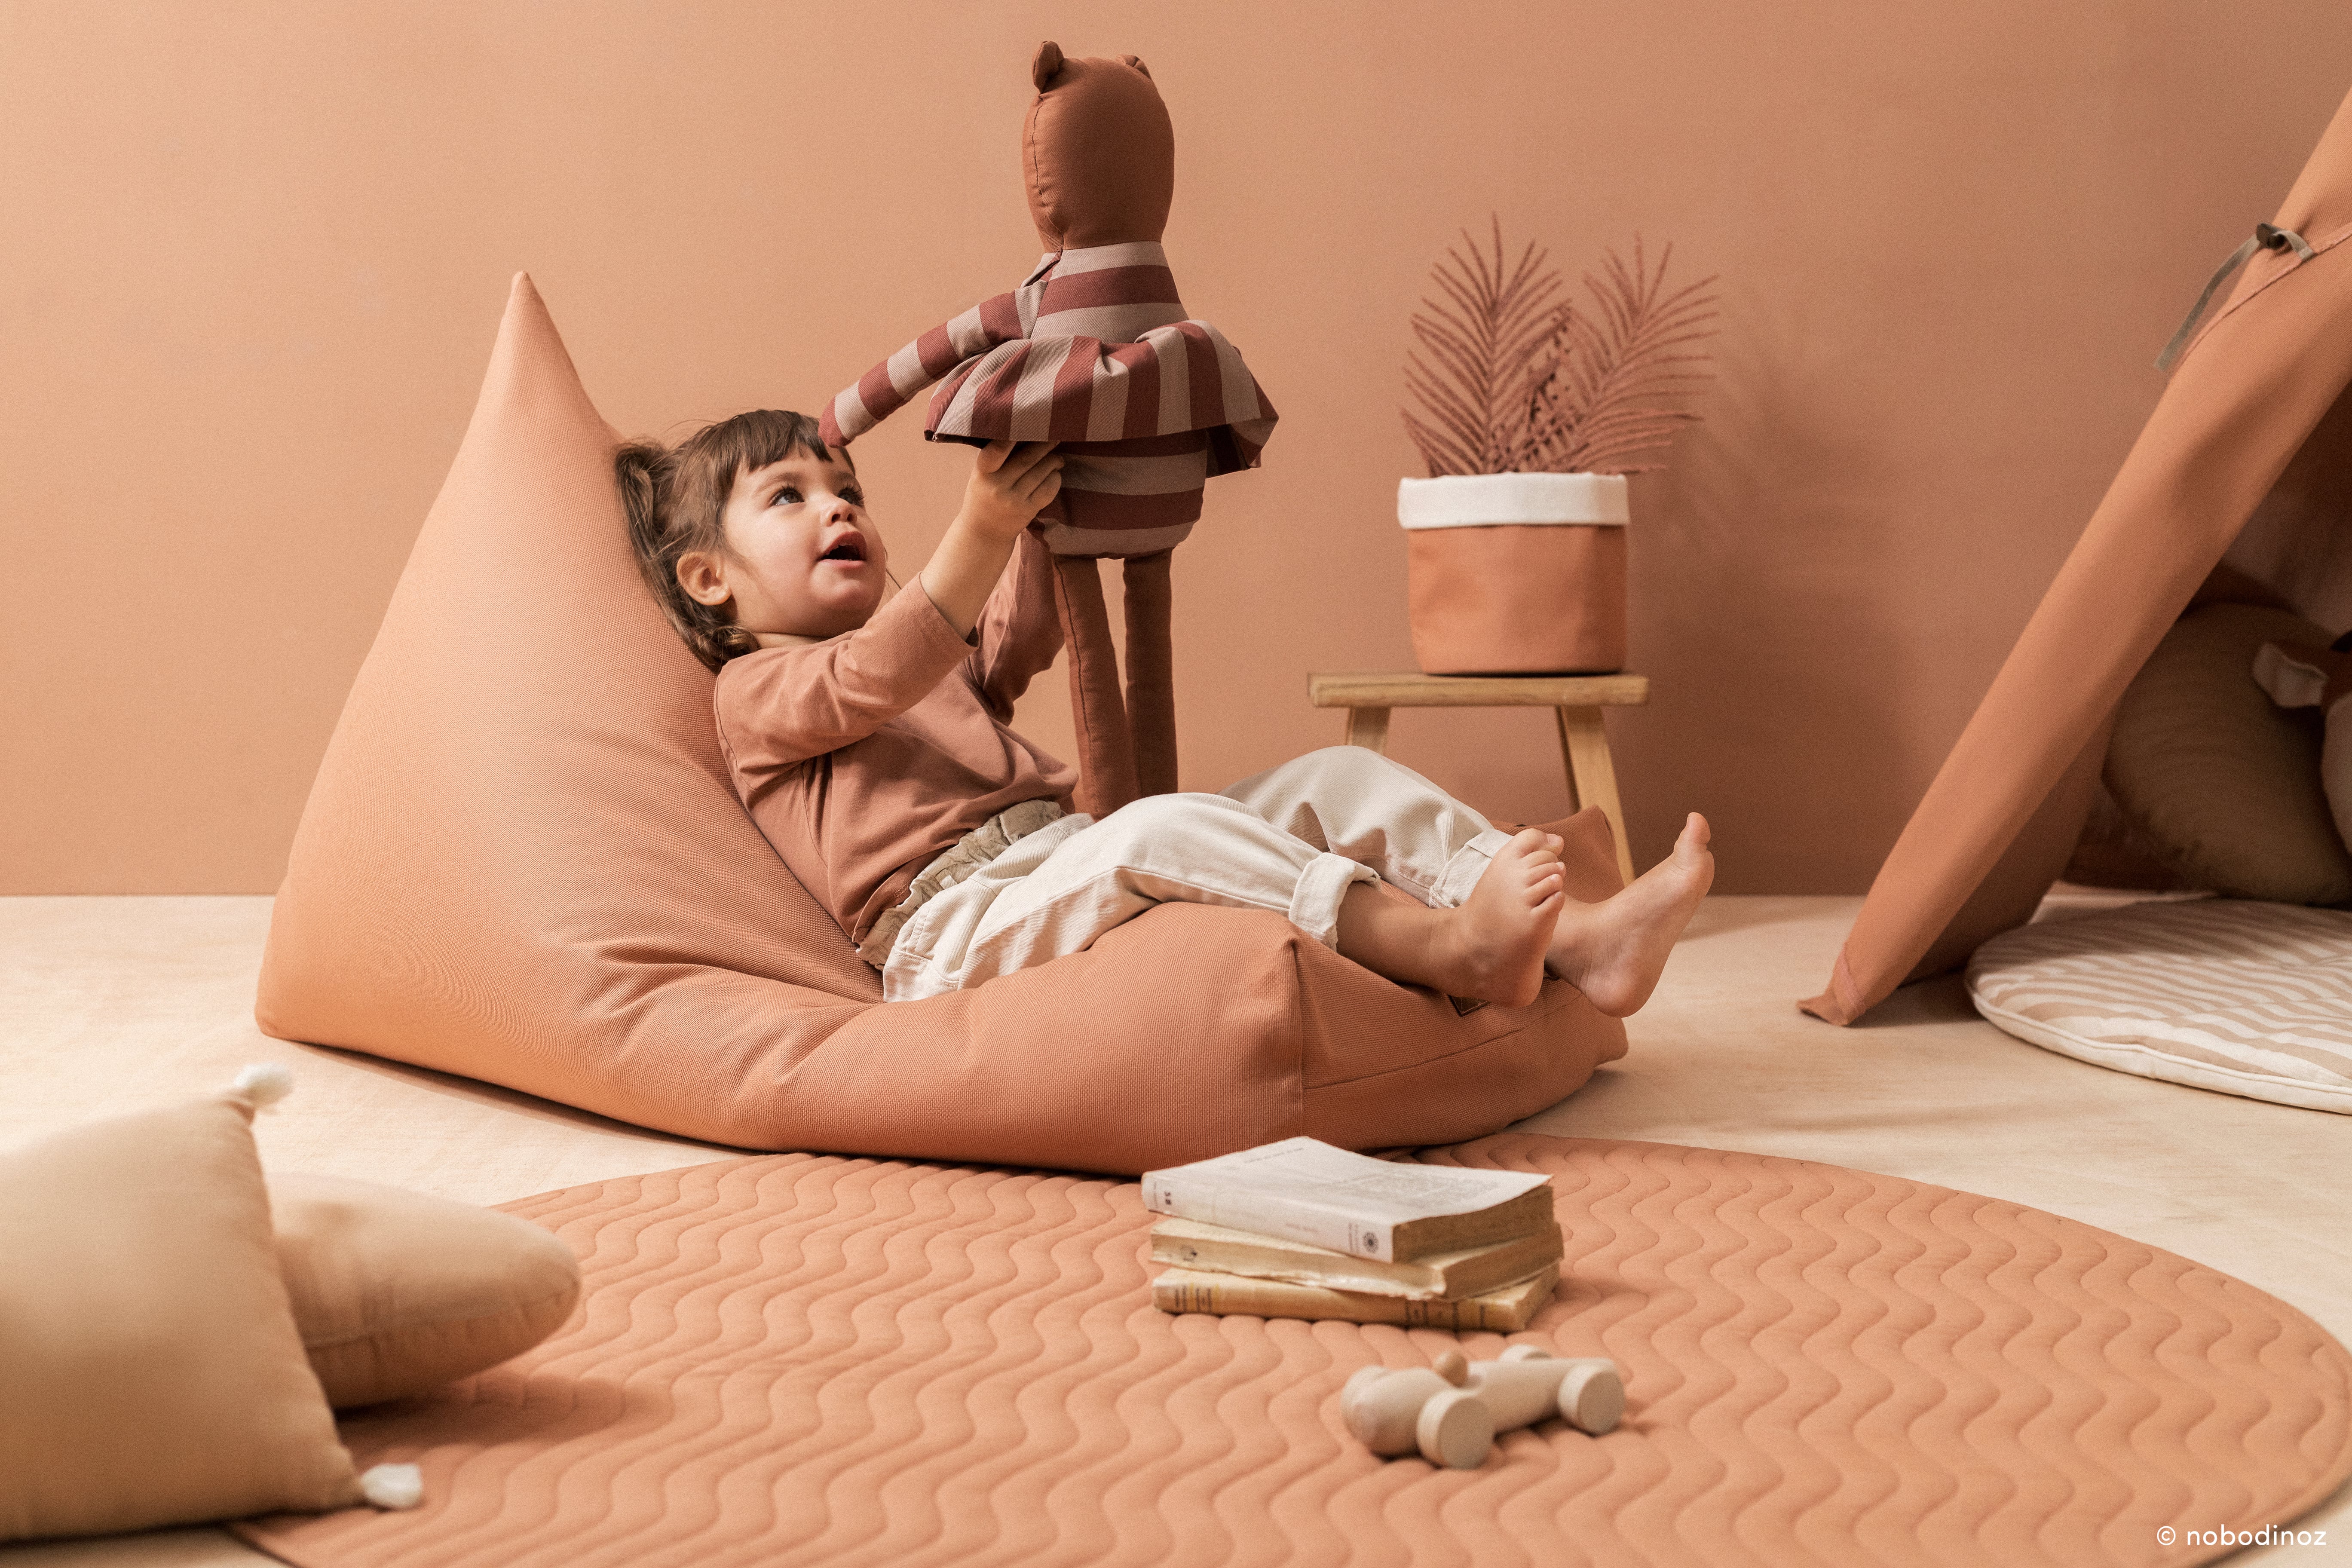 Nobodinoz Singapore, Deer Industries Kids Decor Accessories, Kids Decor Singapore, Kids Bean Bags Singapore, Kids Poufs Singapore, Children Bean Bag with removable covers, washable cover bean bag, Sienna Brown Oasis Bean Bag